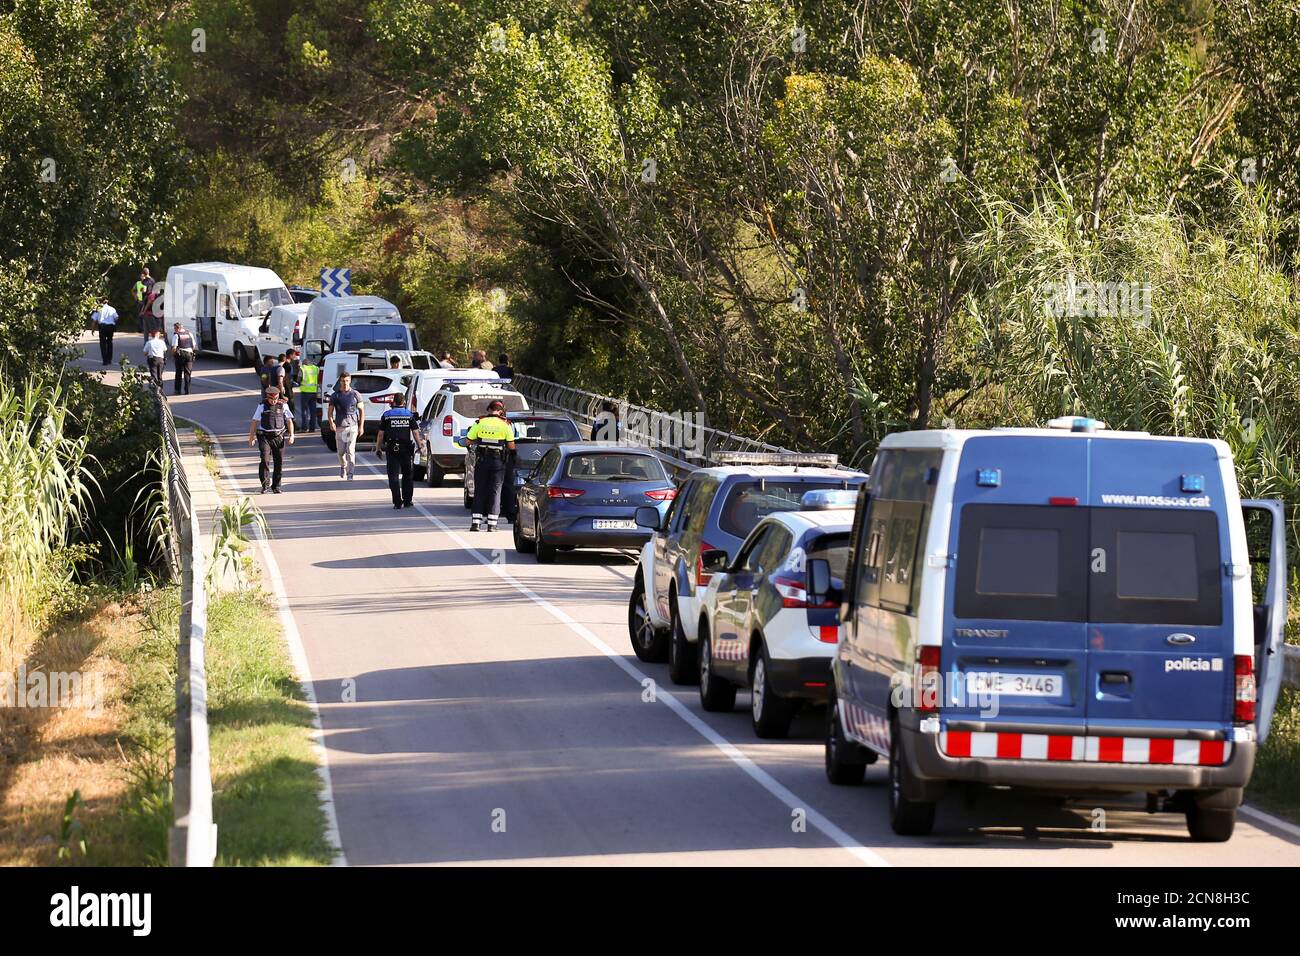 Catalan Mossos d'Escuadra vans are parked along a road near the place where Younes Abouyaaqoub, the man suspected of driving the van that killed 13 people in Barcelona last week, was killed by police in Sant Sadurni d'Noia, Spain, August 21, 2017. REUTERS/Albert Gea Stock Photo